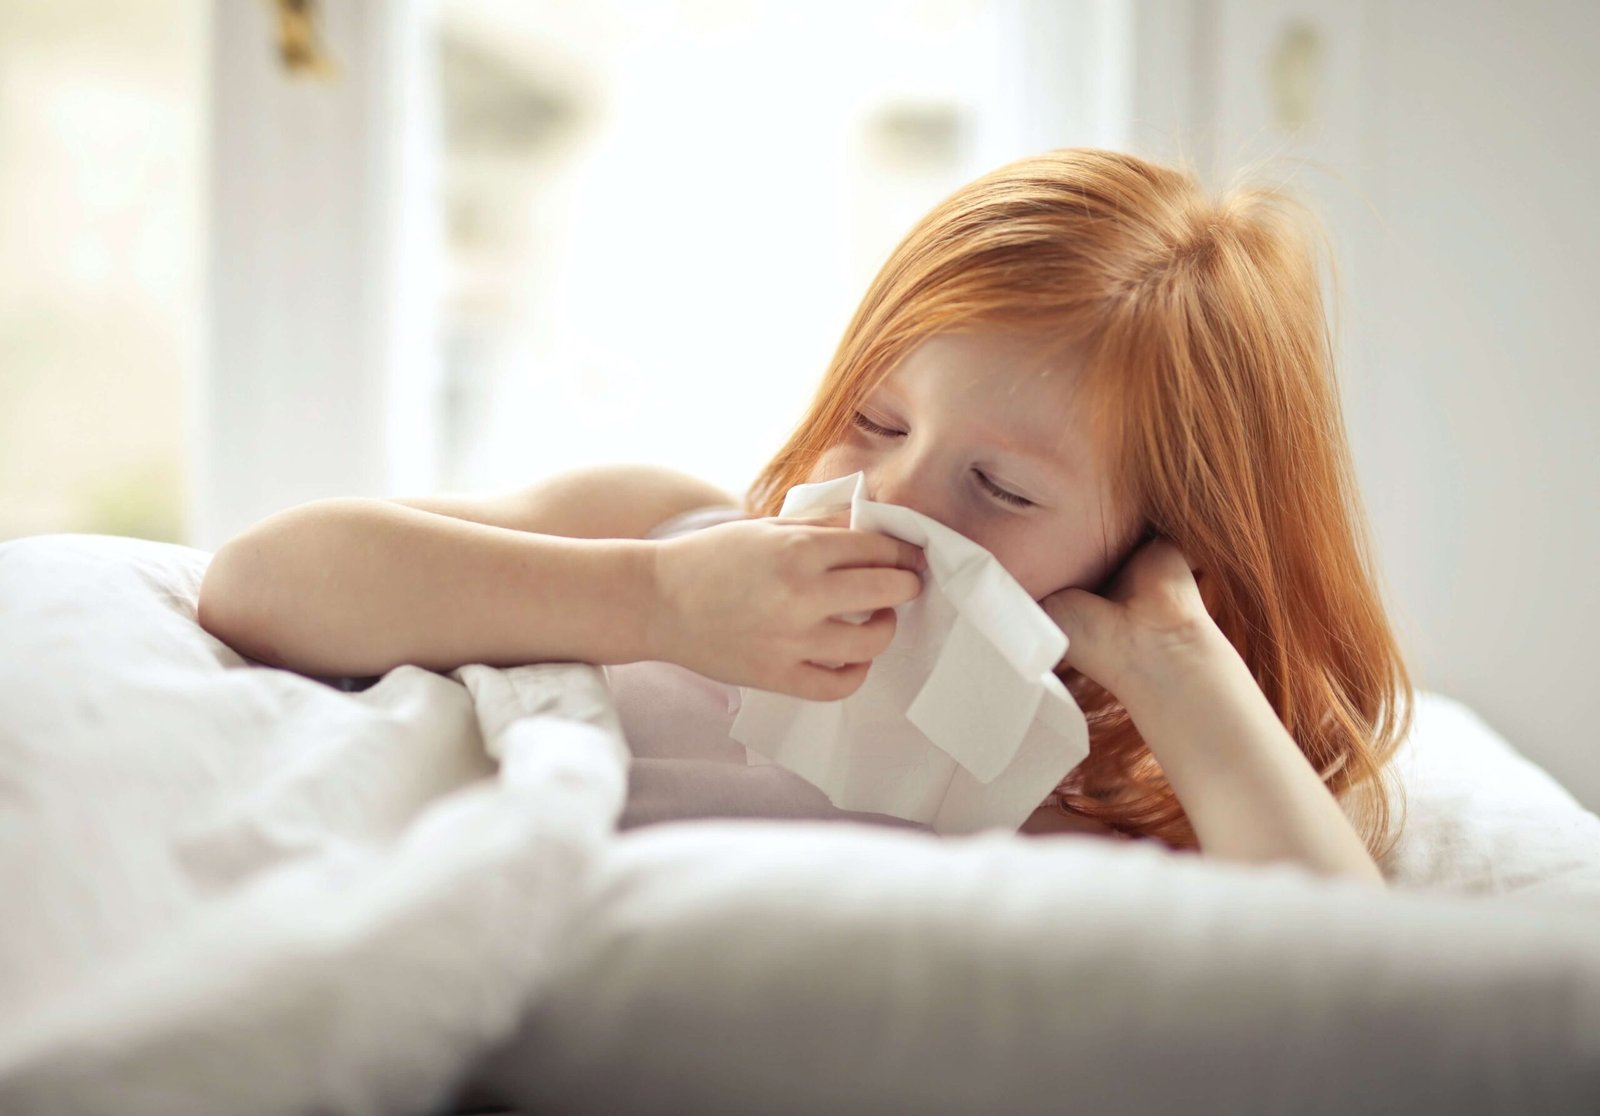 PREPARING FOR COLD AND FLU SEASON: THE RIGHT WAY